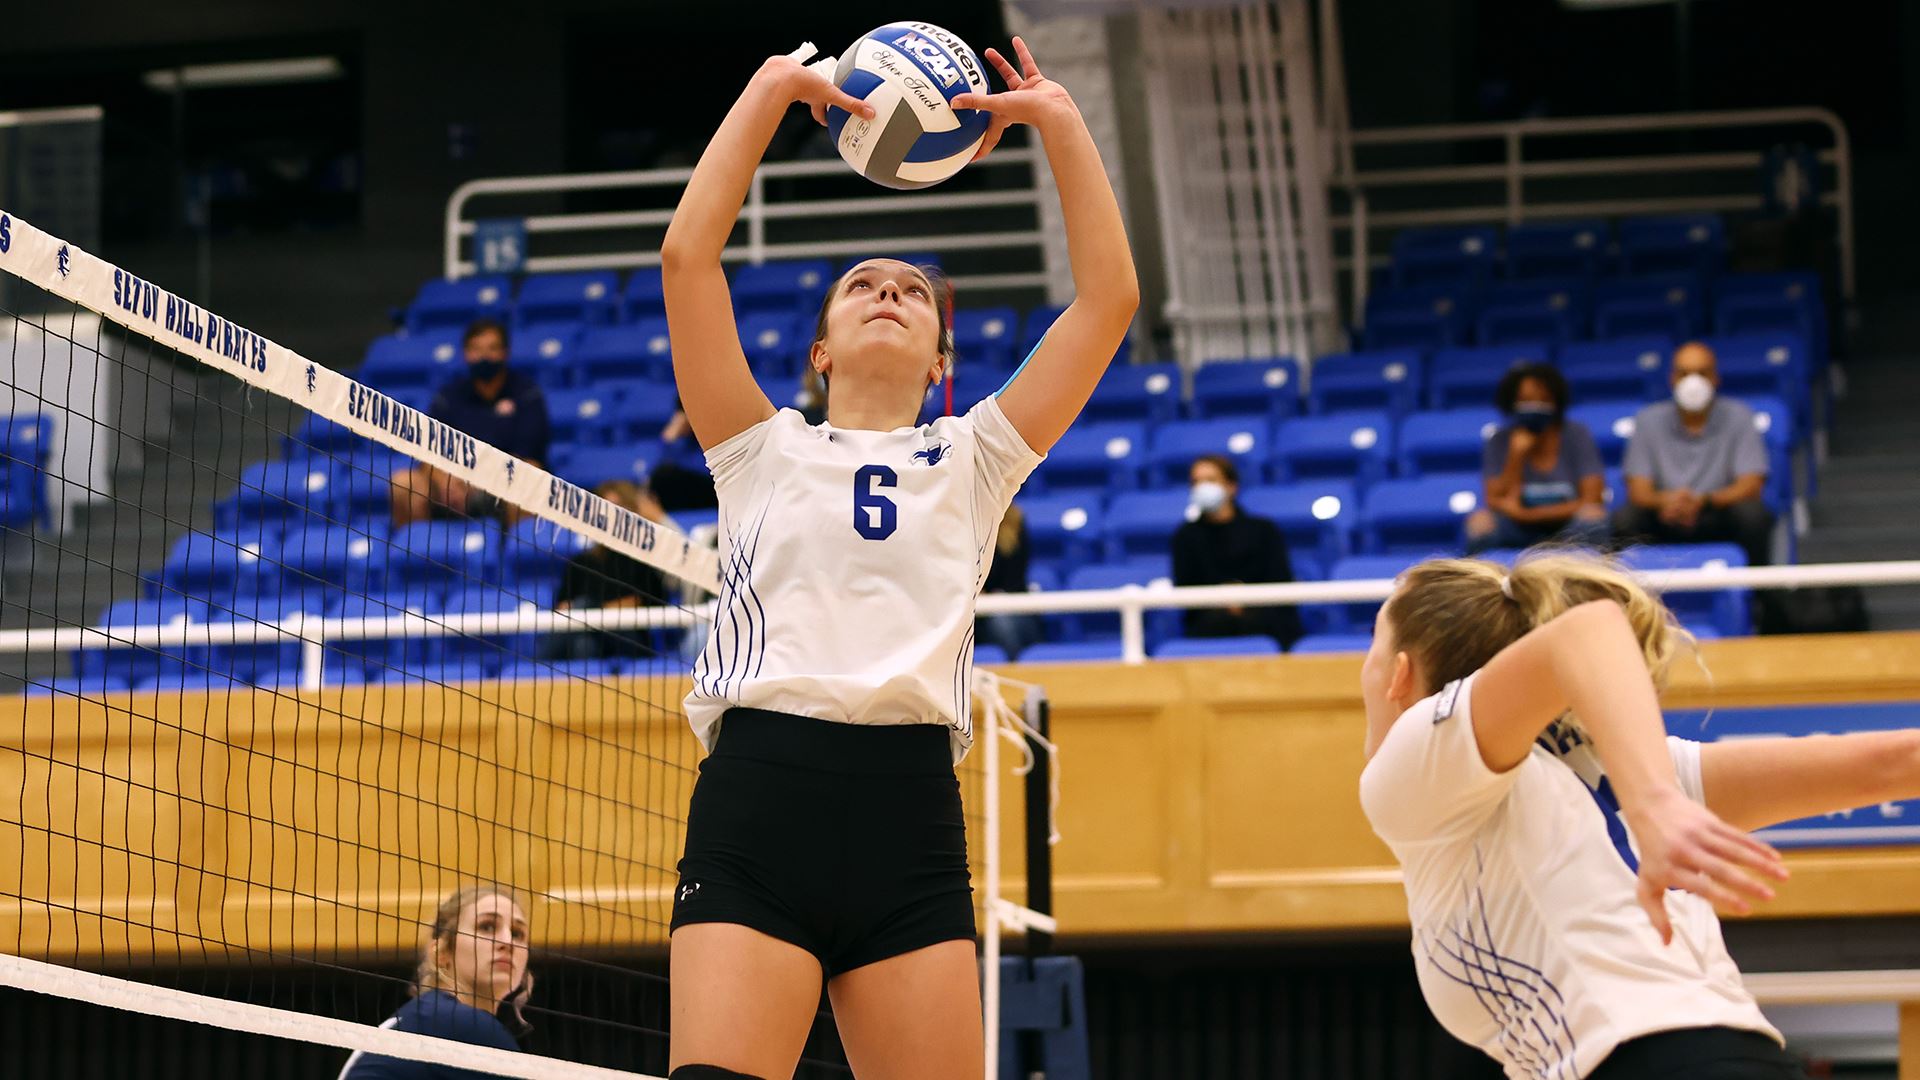 A Seton Hall women's volleyball player sets the ball during a match.